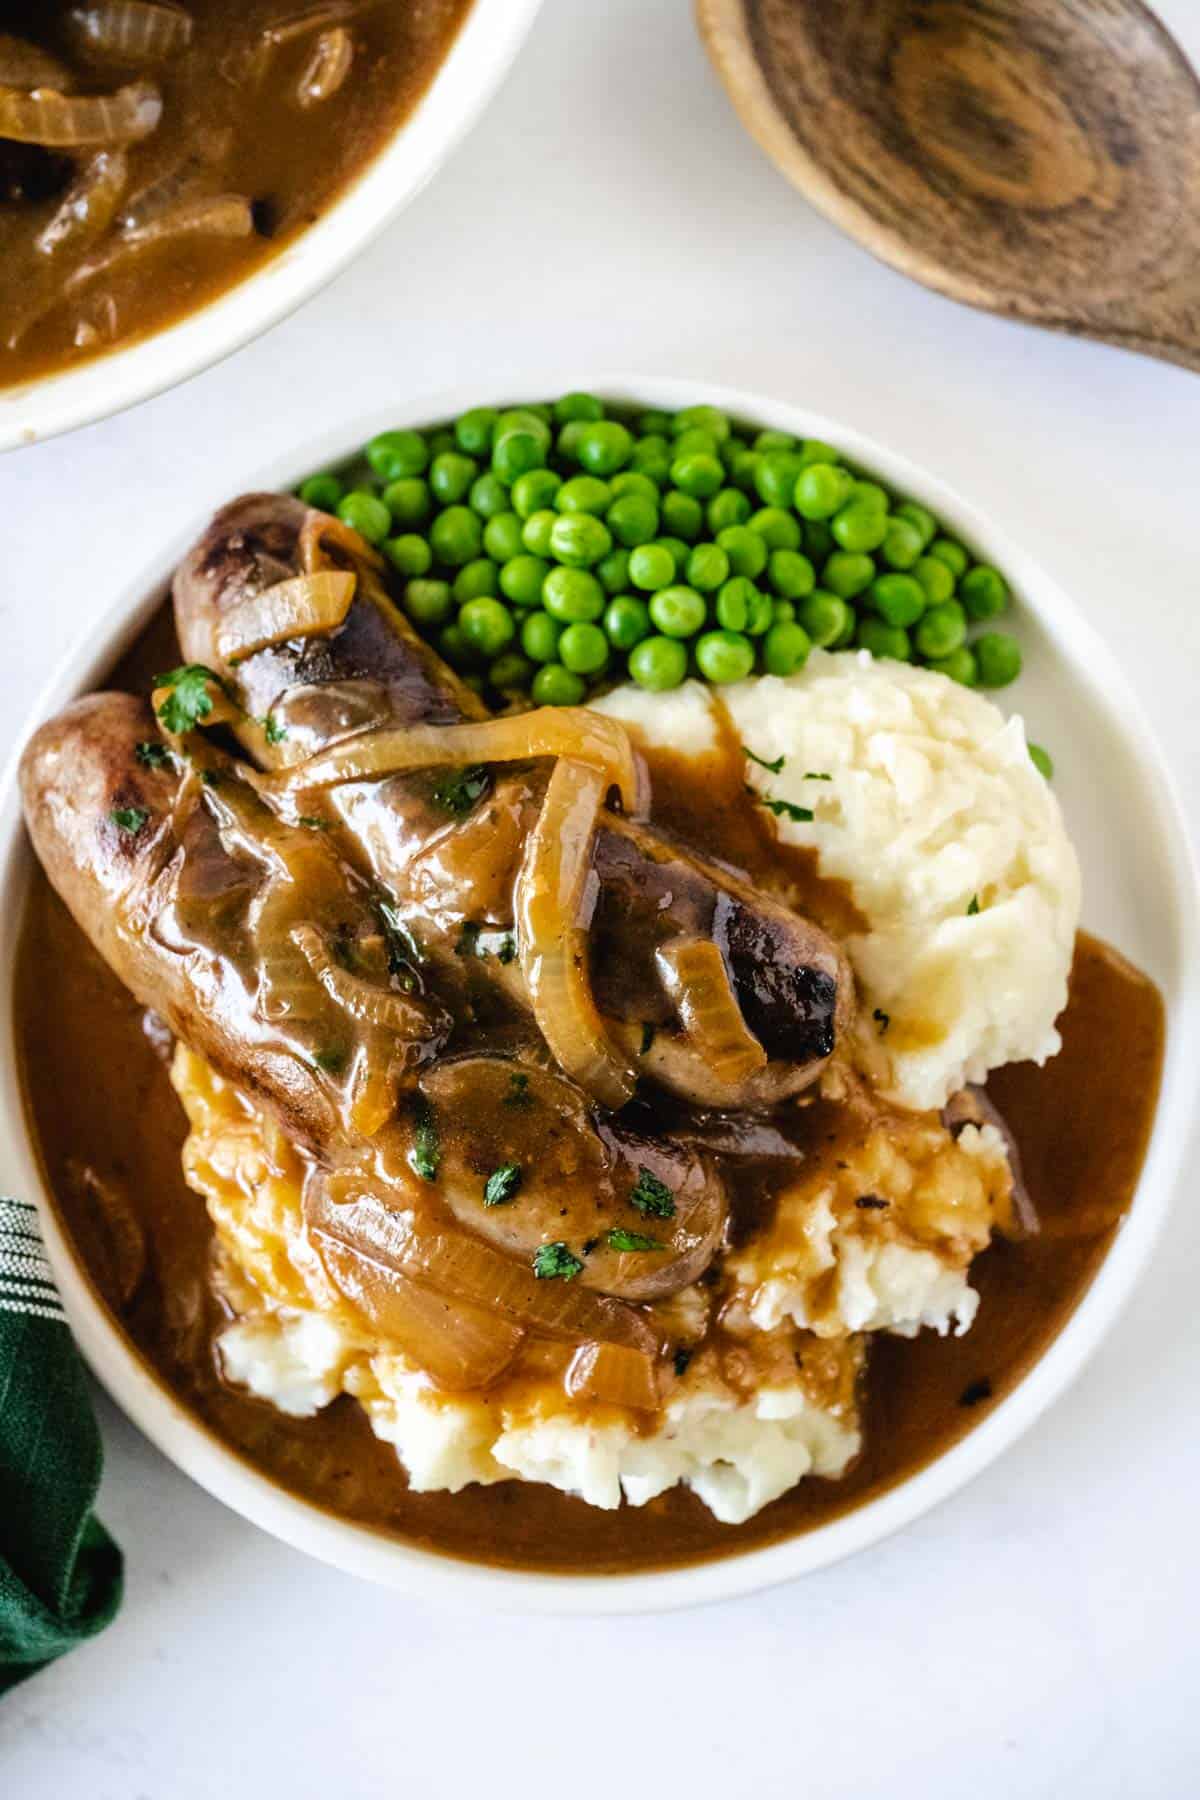 Bangers and mash plated with onion gravy and peas.